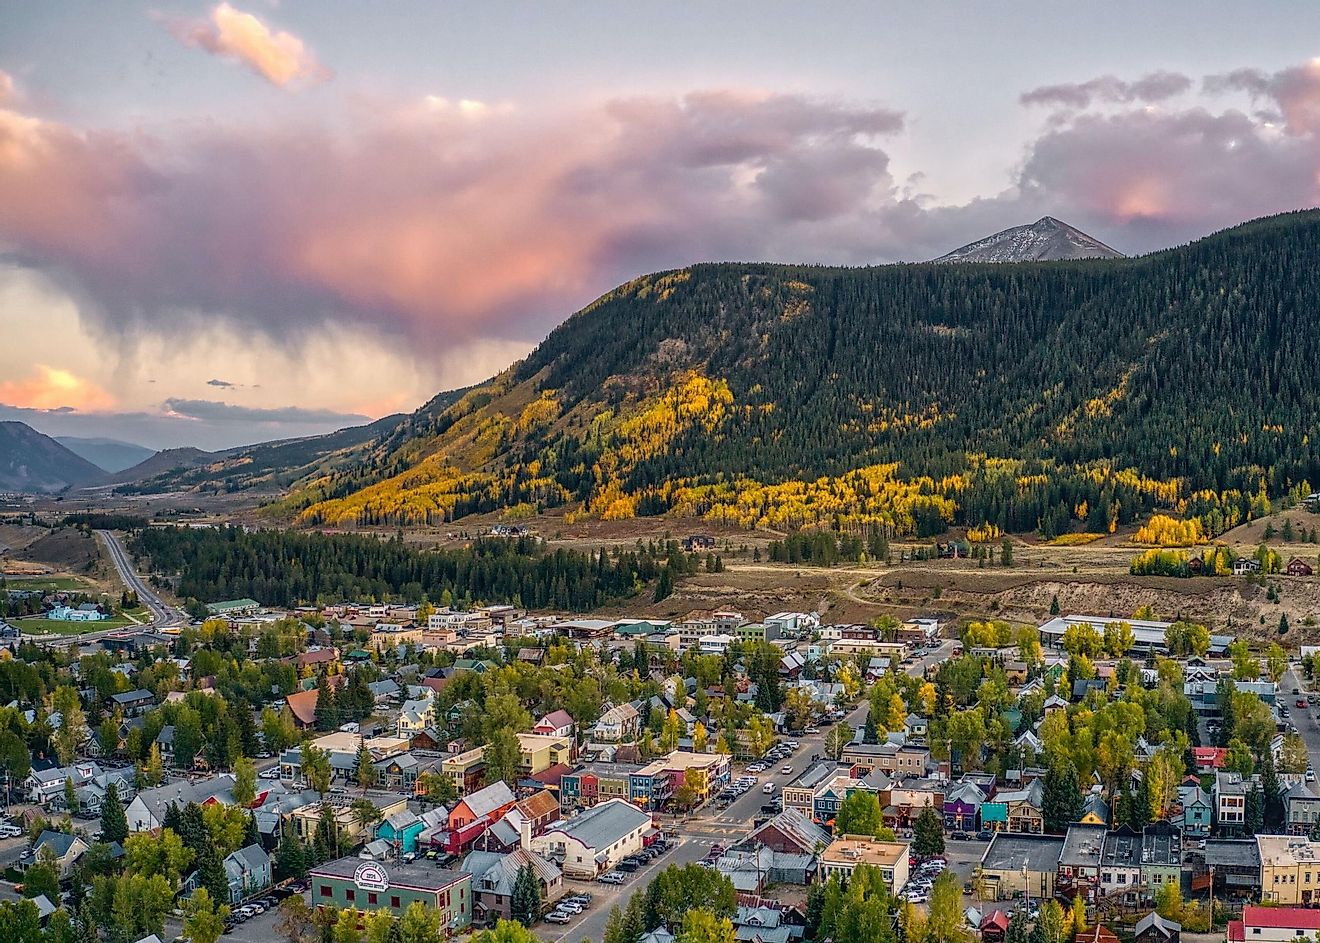 beautiful fall colors in Crested Butte, Colorado during the fall